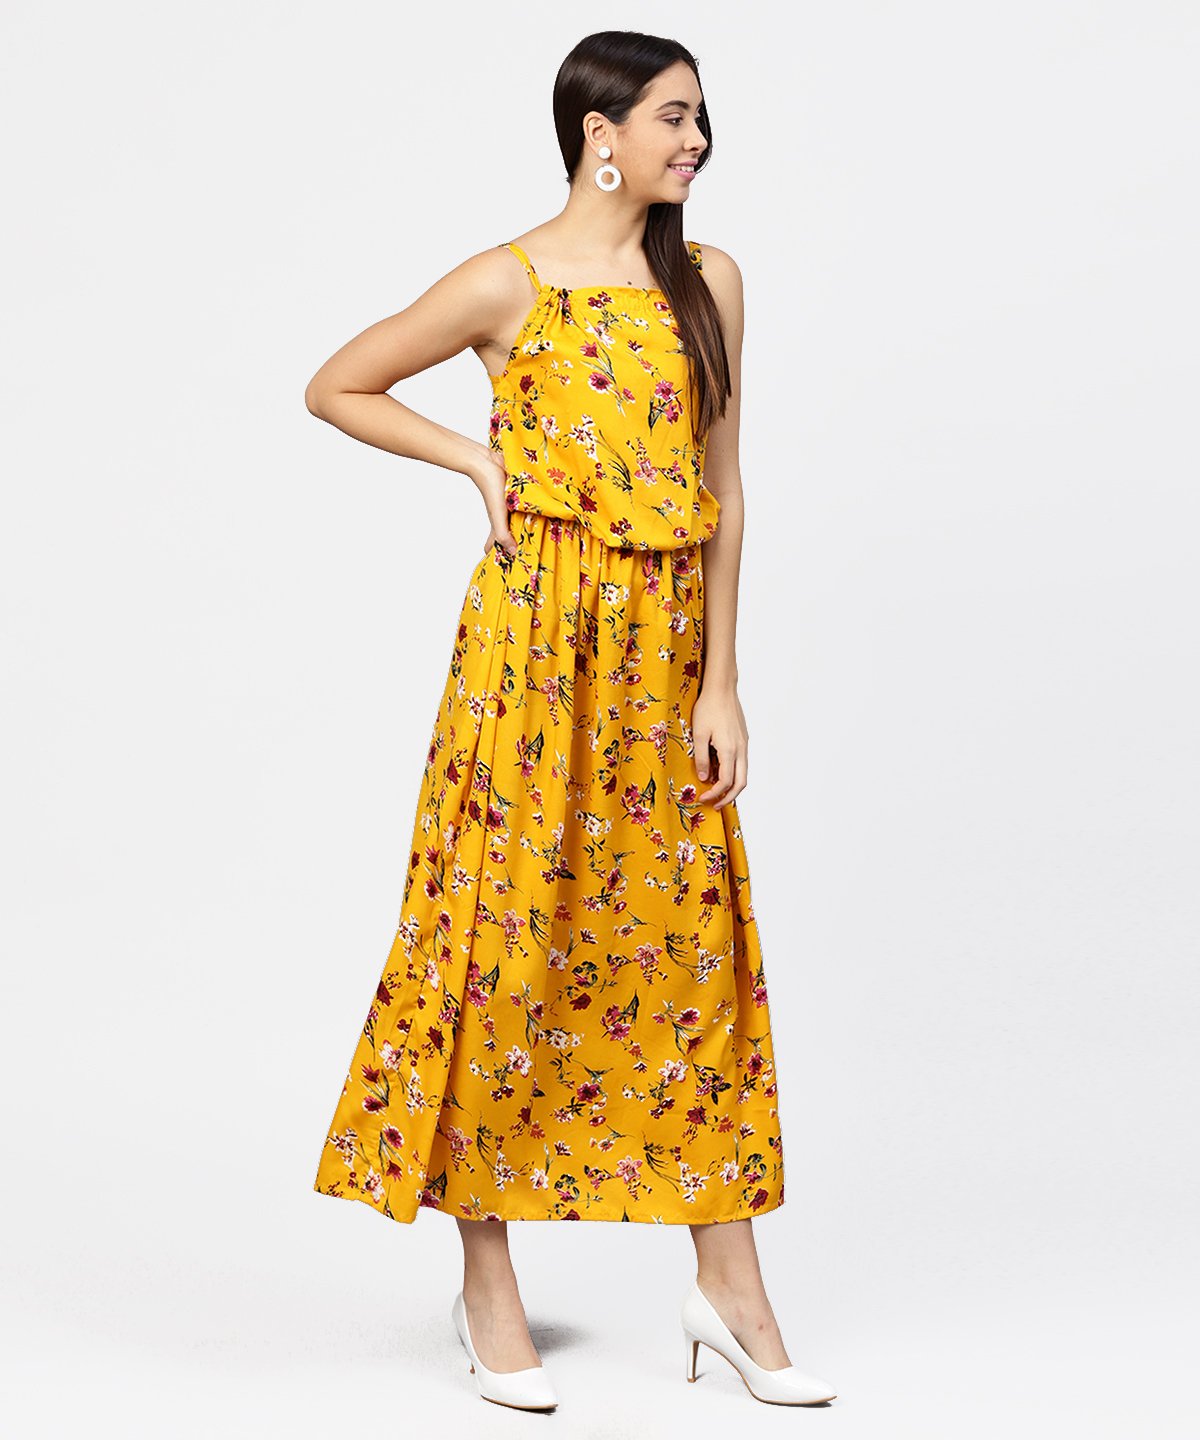 Women's Yellow Printed Shoulder Strapped With A Gather Neckline Maxi Dress - Nayo Clothing